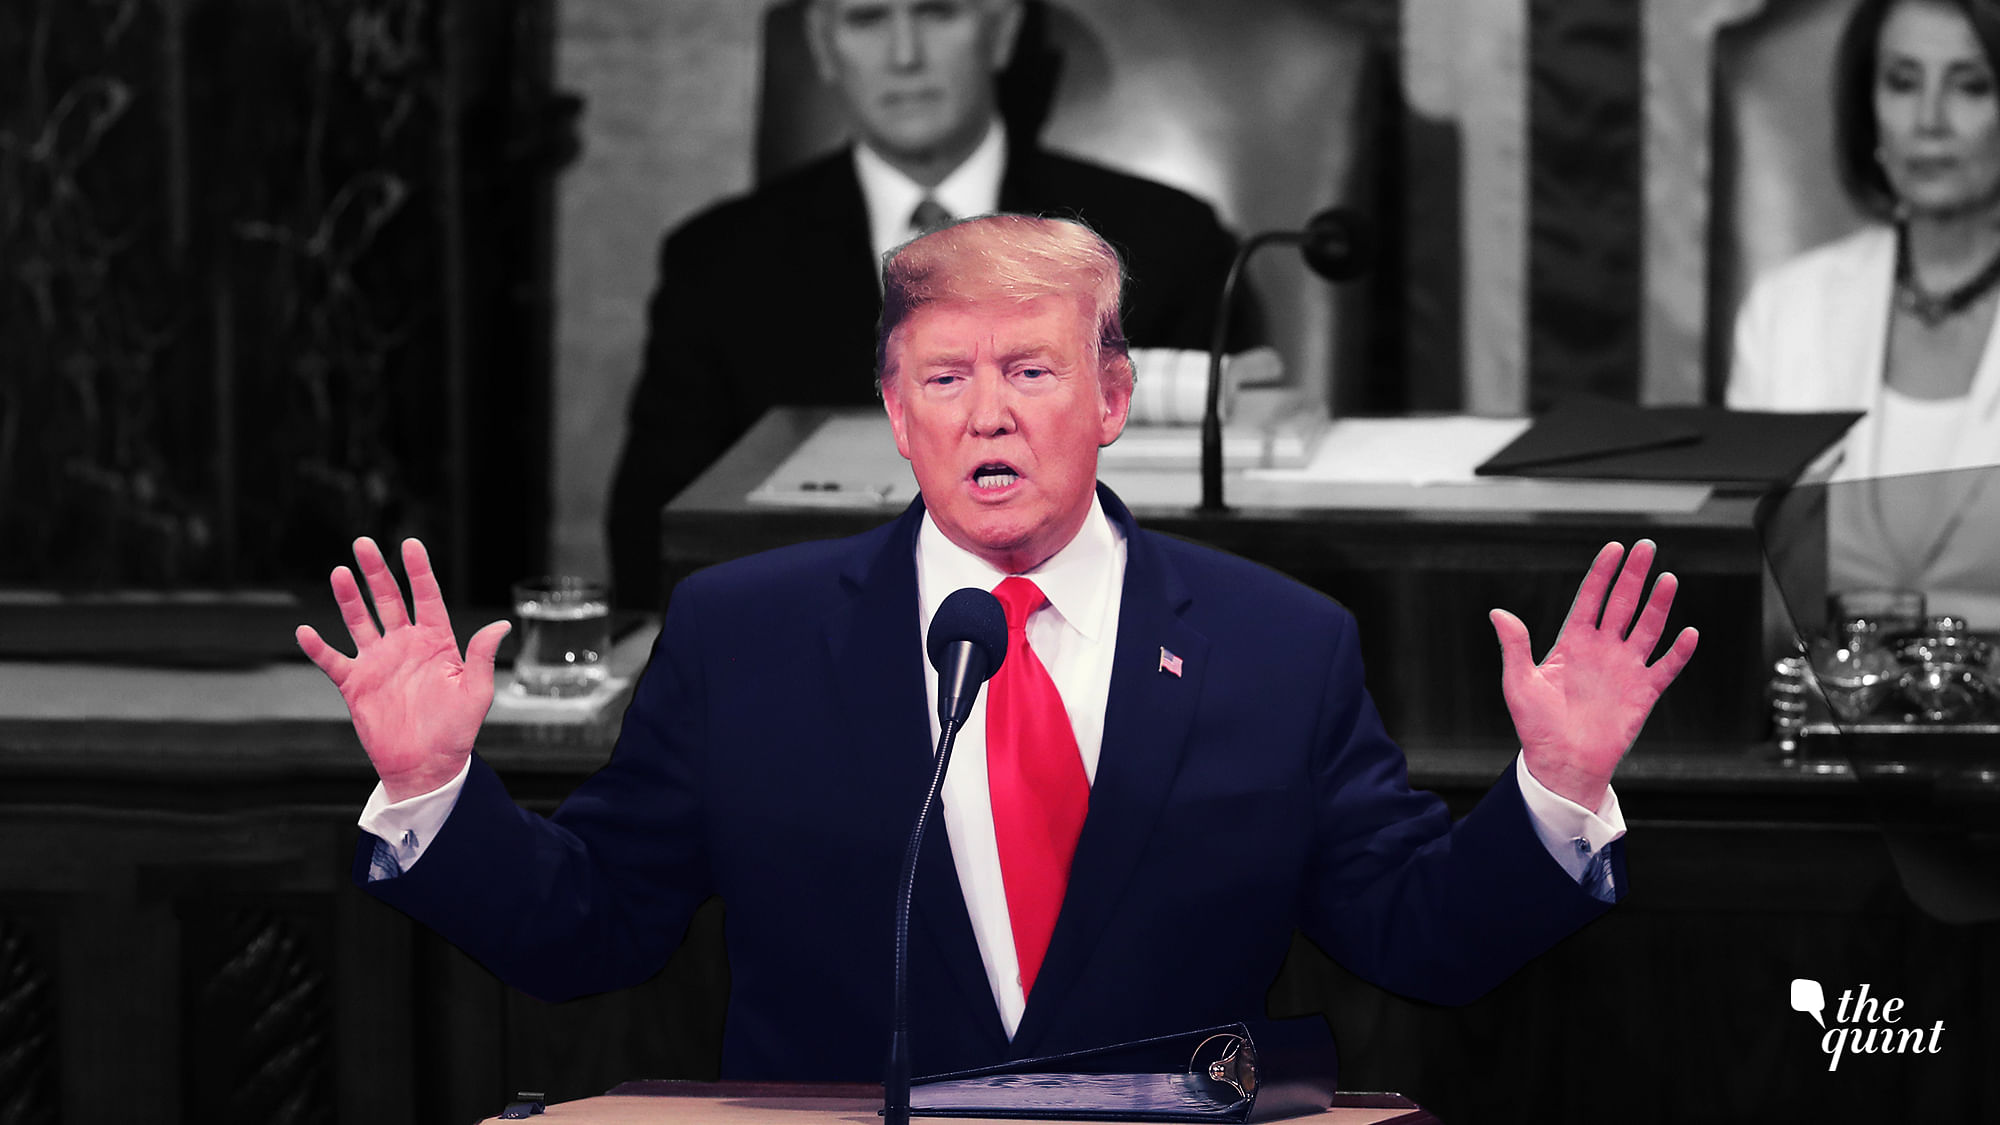 President Trump delivers his State of the Union address to a joint session of Congress on Capitol Hill in Washington on 5 February 2019.